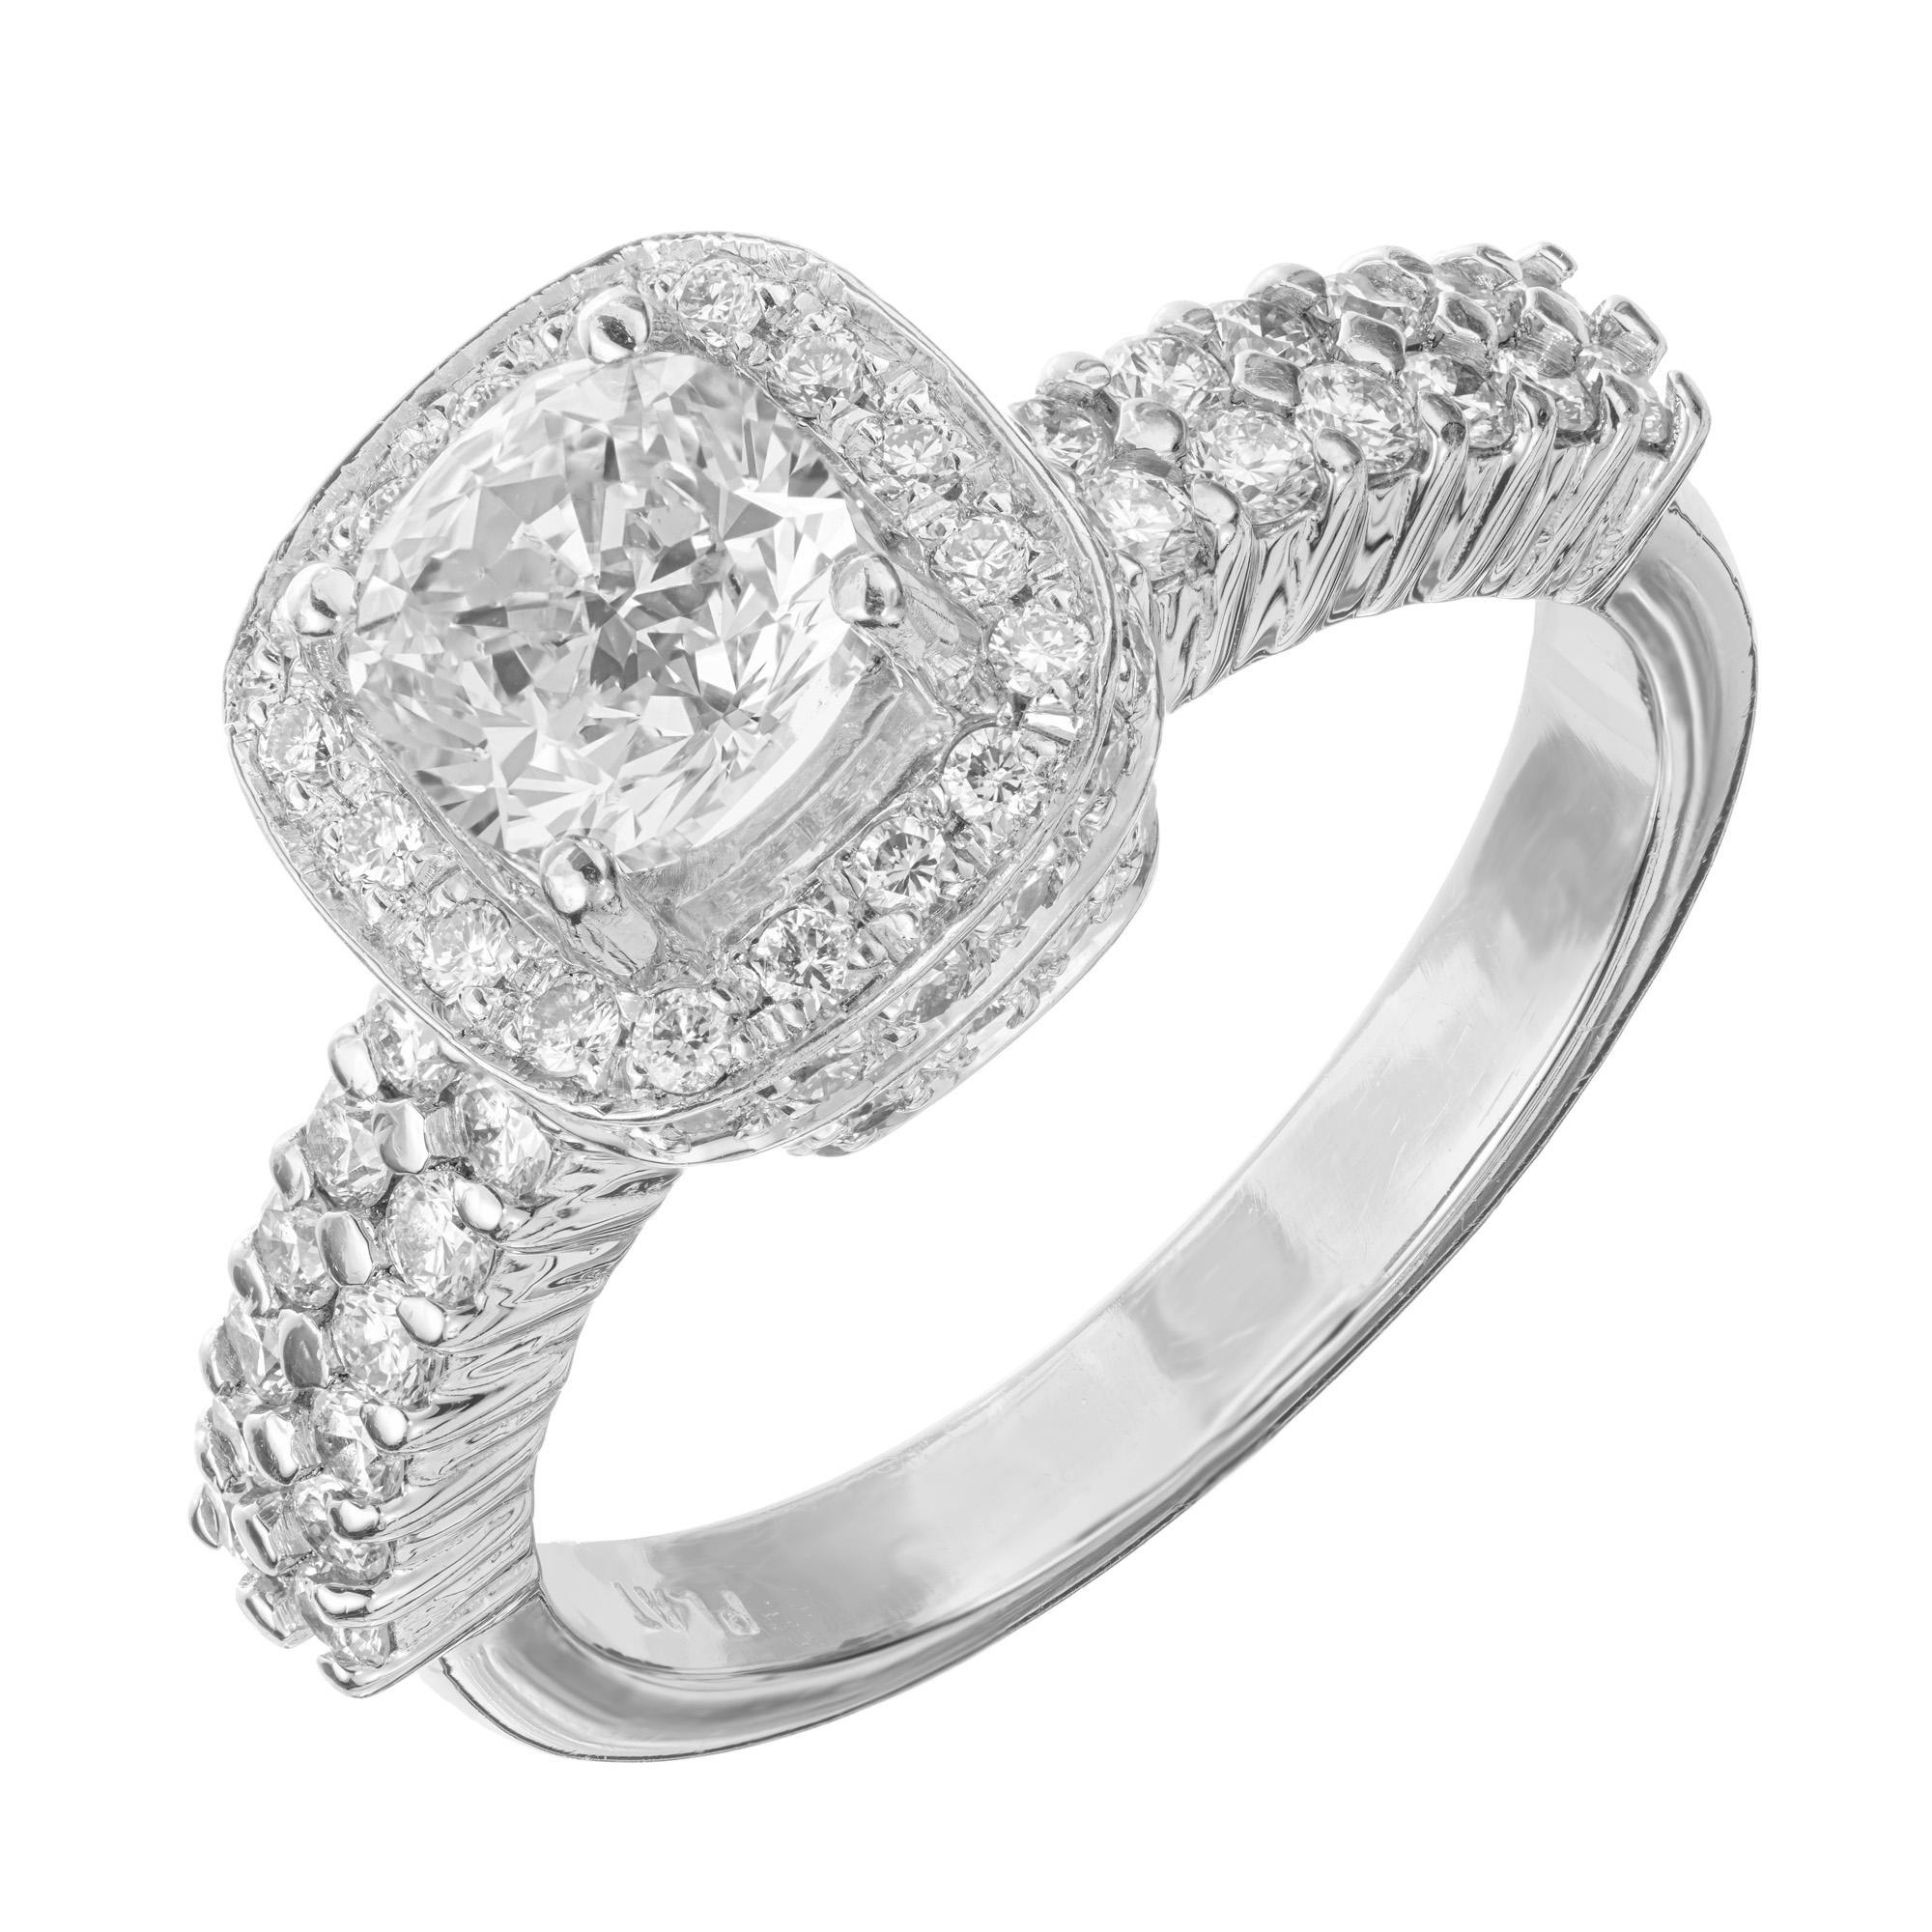 Diamond engagement ring. GIA certified cushion cut diamond center stone, set in platinum with a halo of round cut diamonds and round accent diamonds along crown and shank.  

1 cushion diamond, approx. total weight 1.02cts, I, VS2, GIA certificate